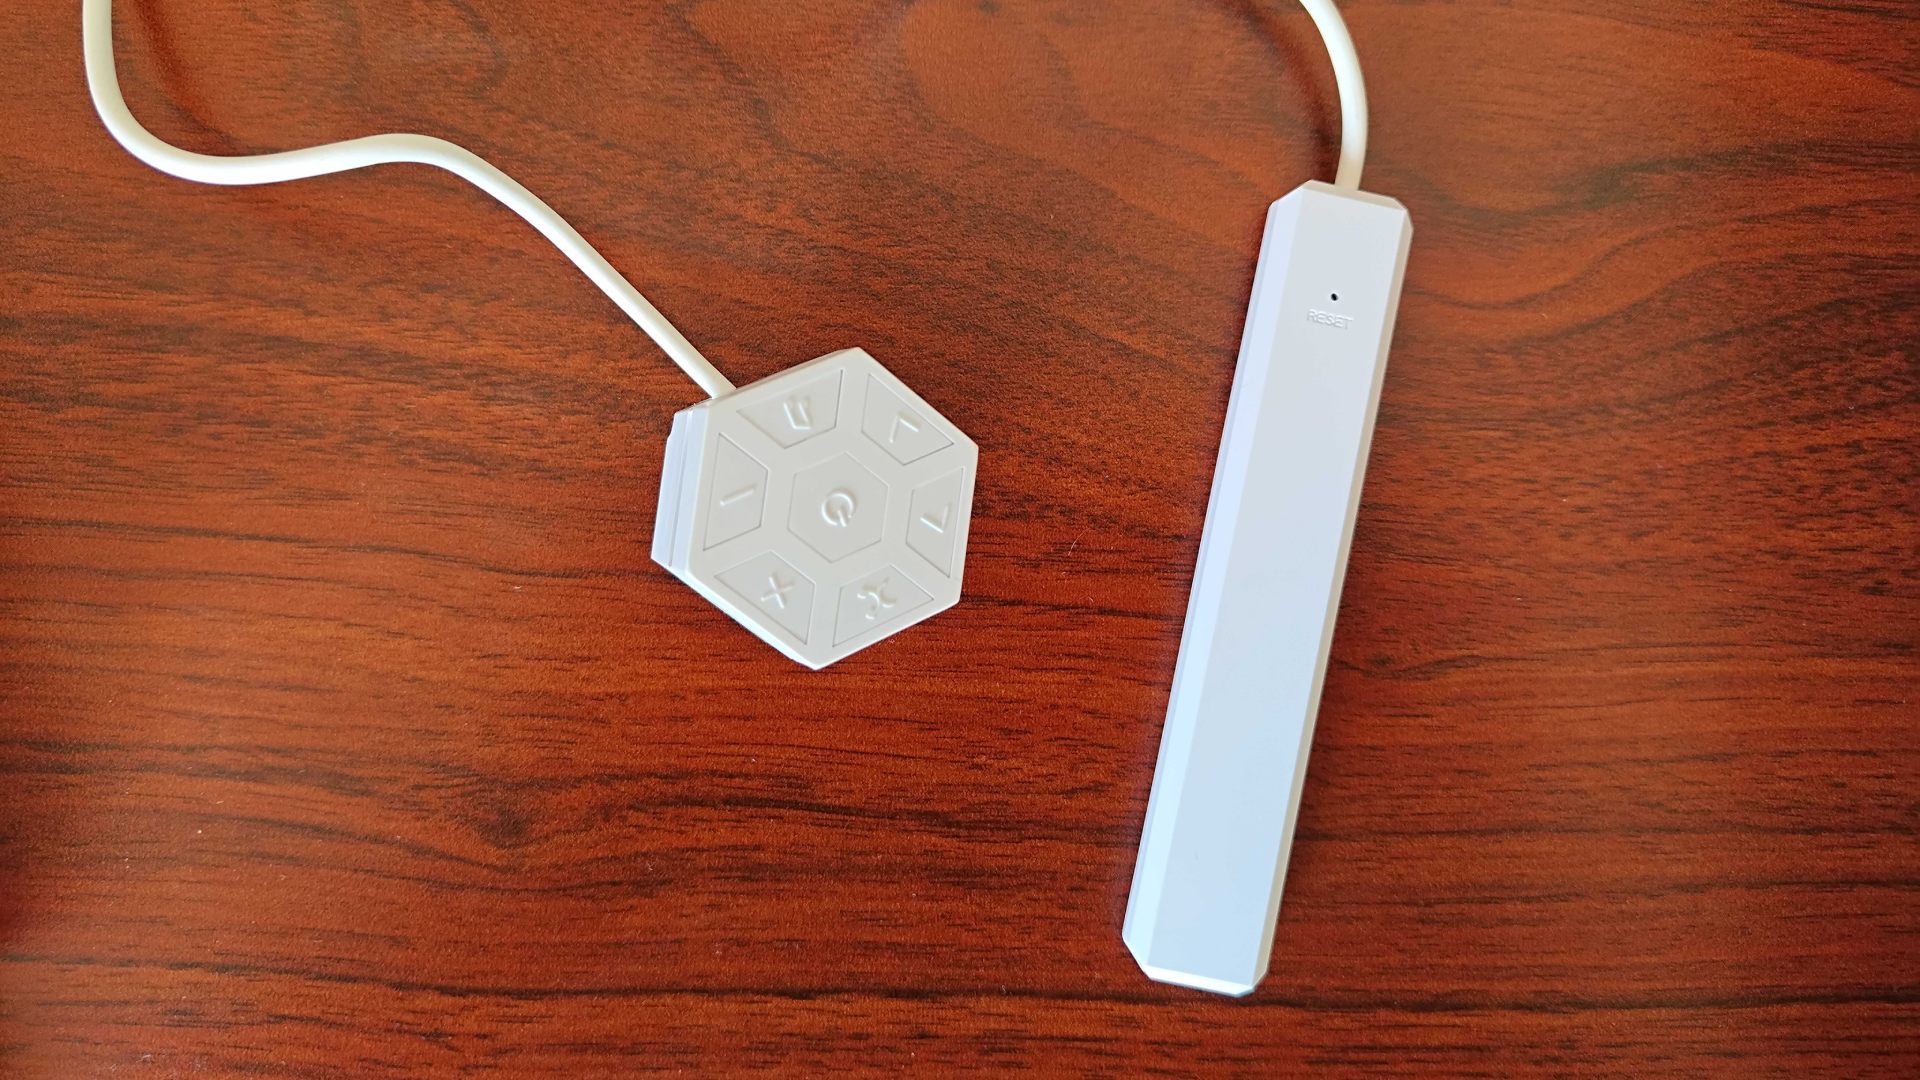 Nanoleaf Lines power button and receiver